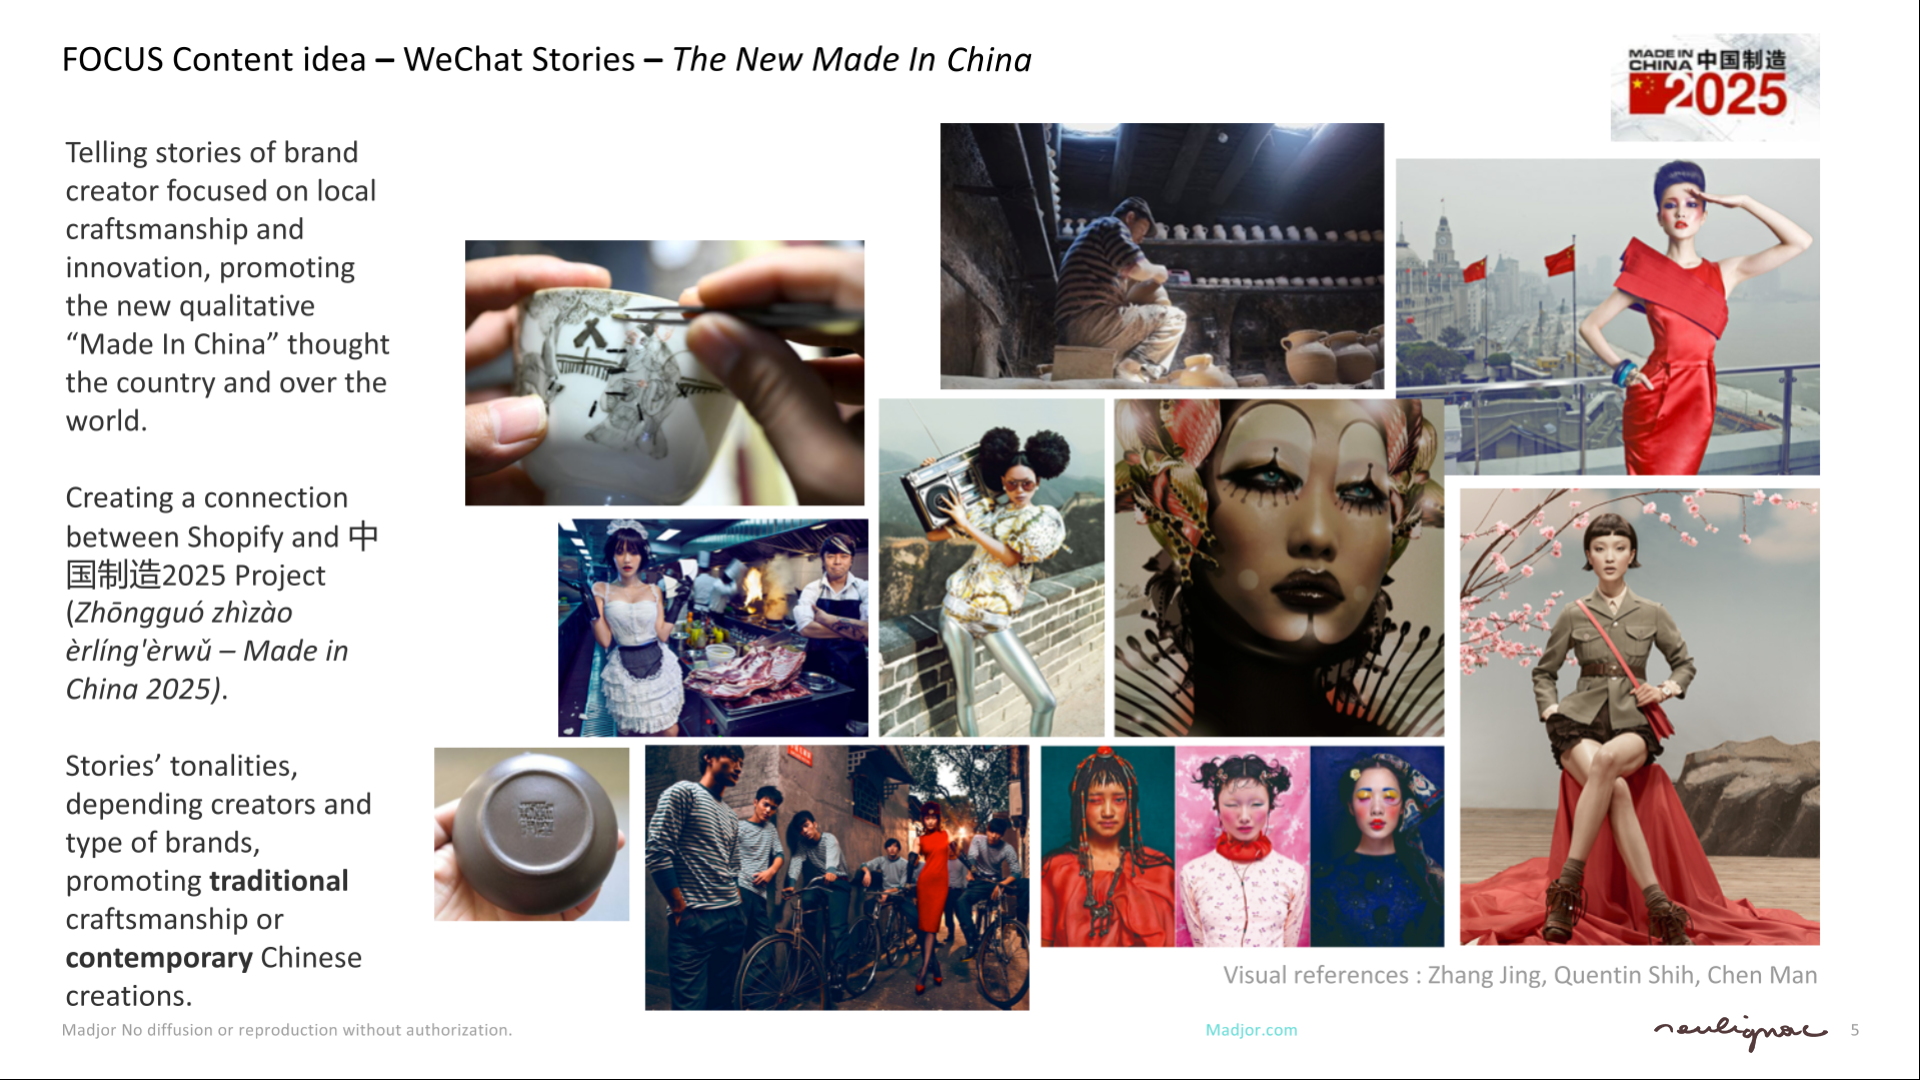 Shopify China - Social Content Creation - THE NEW MADE IN CHINA - Francois Soulignac - Digital Creative & Art Direction - MADJOR Labbrand Shanghai, China